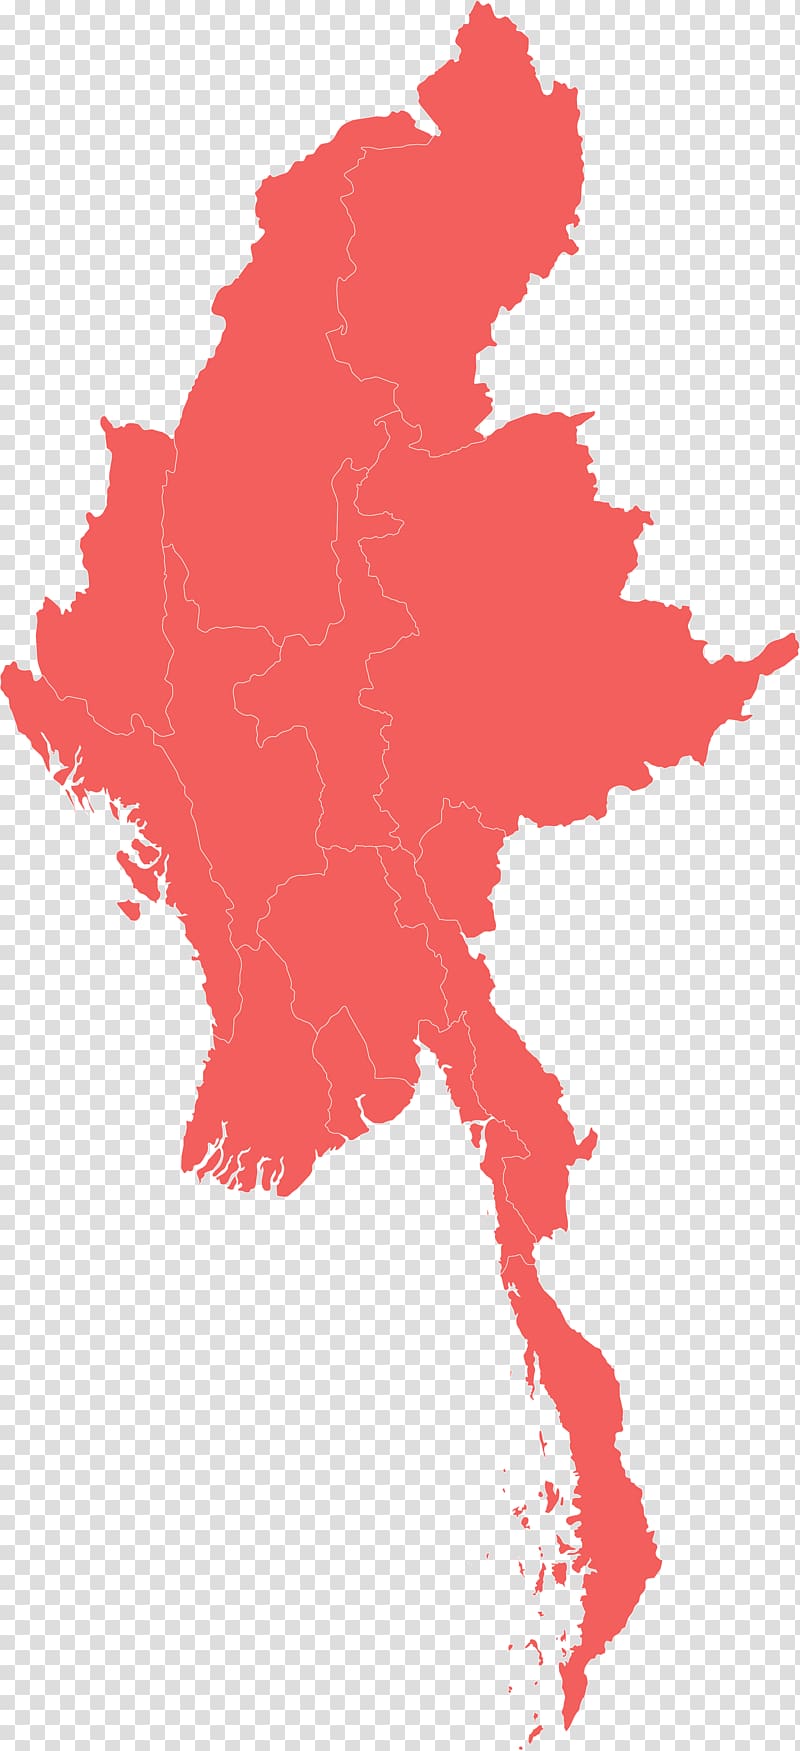 Burma Flag of Myanmar Map, map transparent background PNG clipart